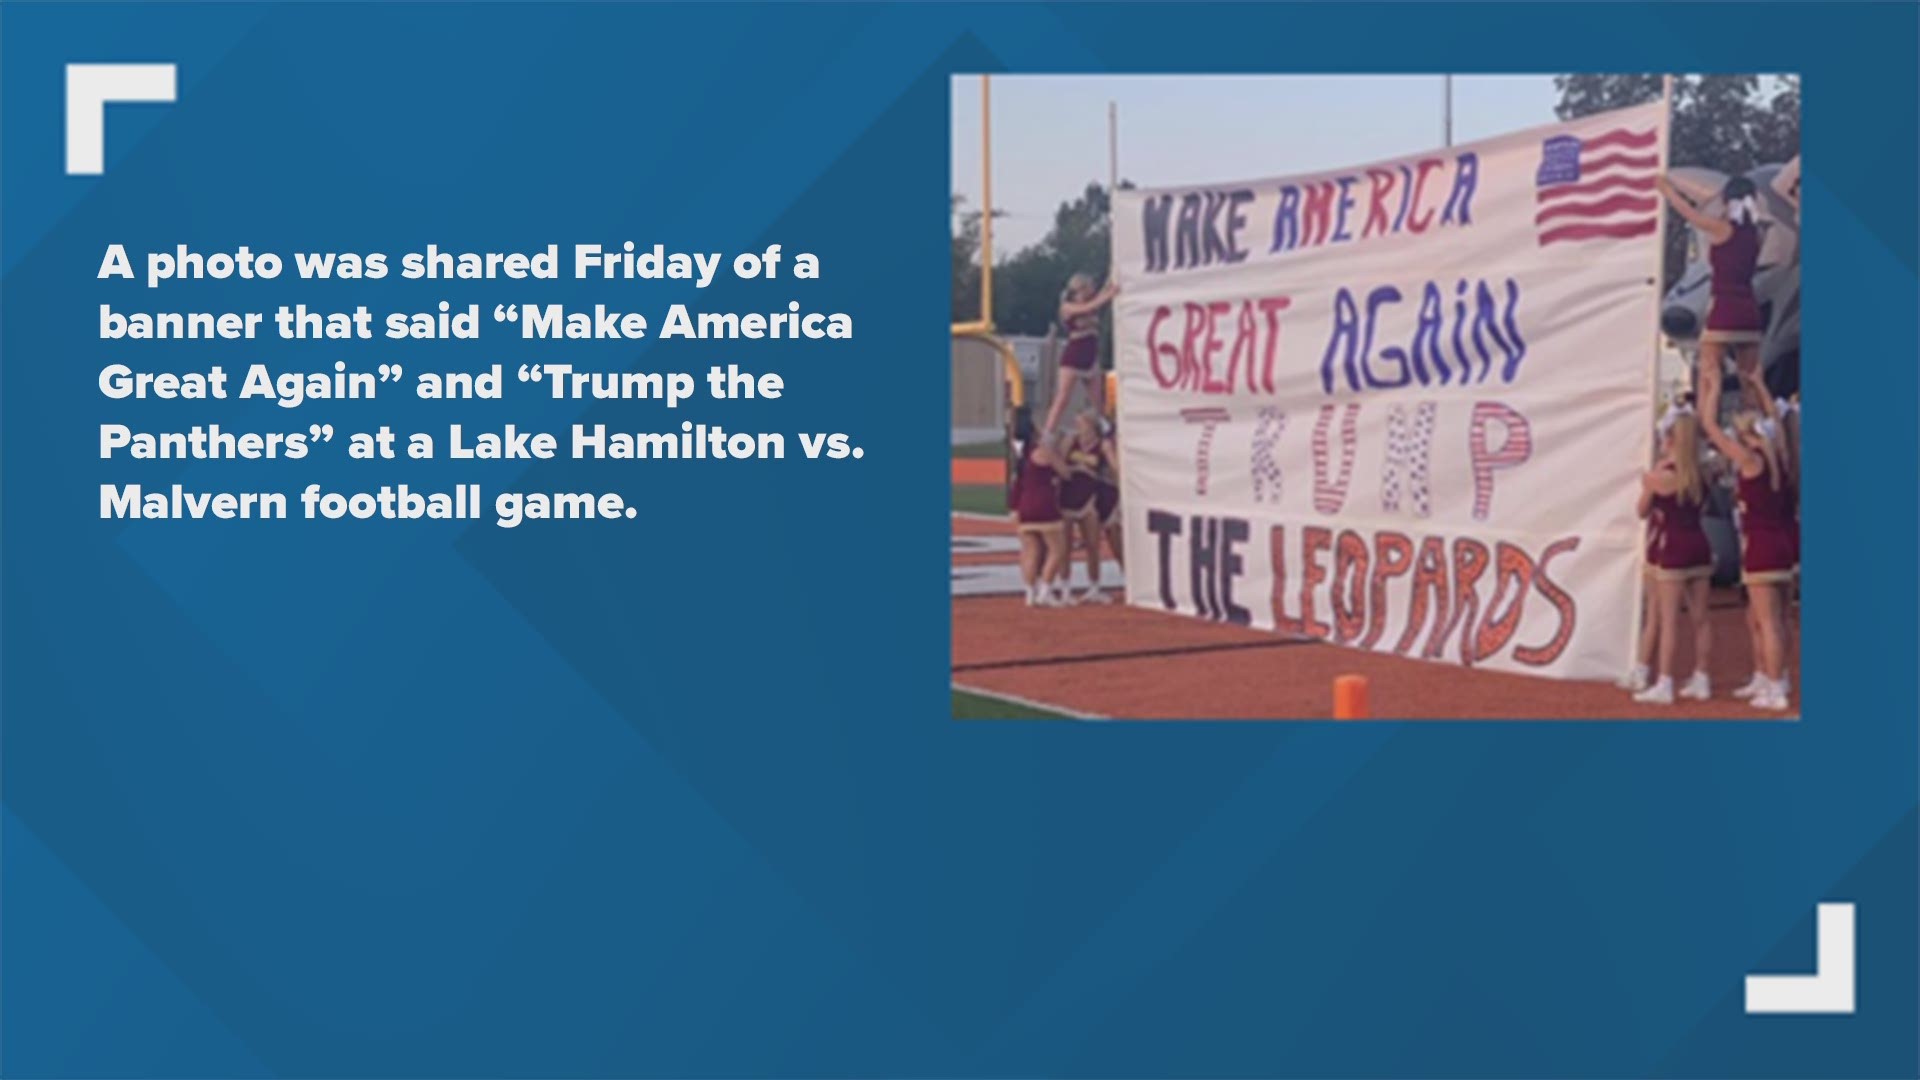 After the 'Make America Great Again' banner was displayed, the school district said future banners won't reference political or controversial issues.